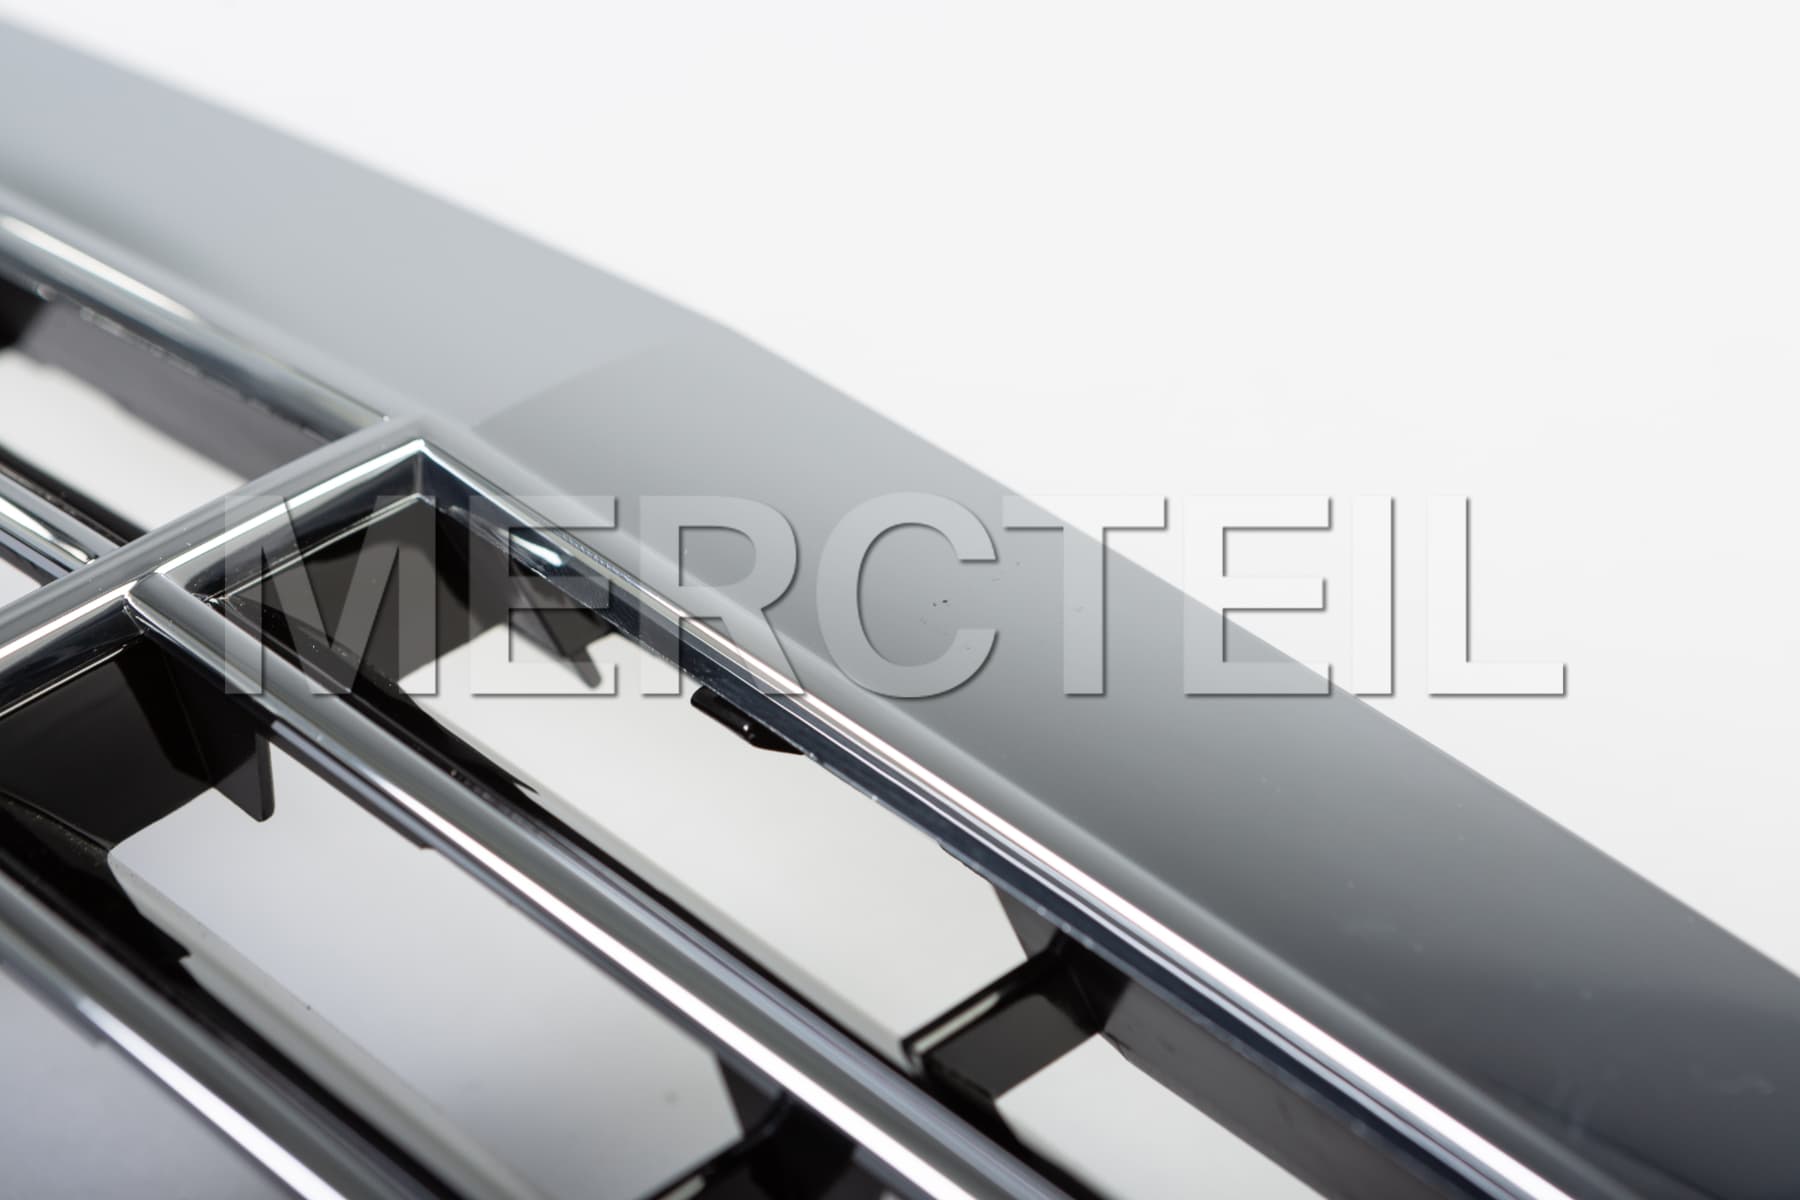 E Class Avantgarde Radiator Grille W211 Genuine Mercedes Benz (part number: A21188005839040)